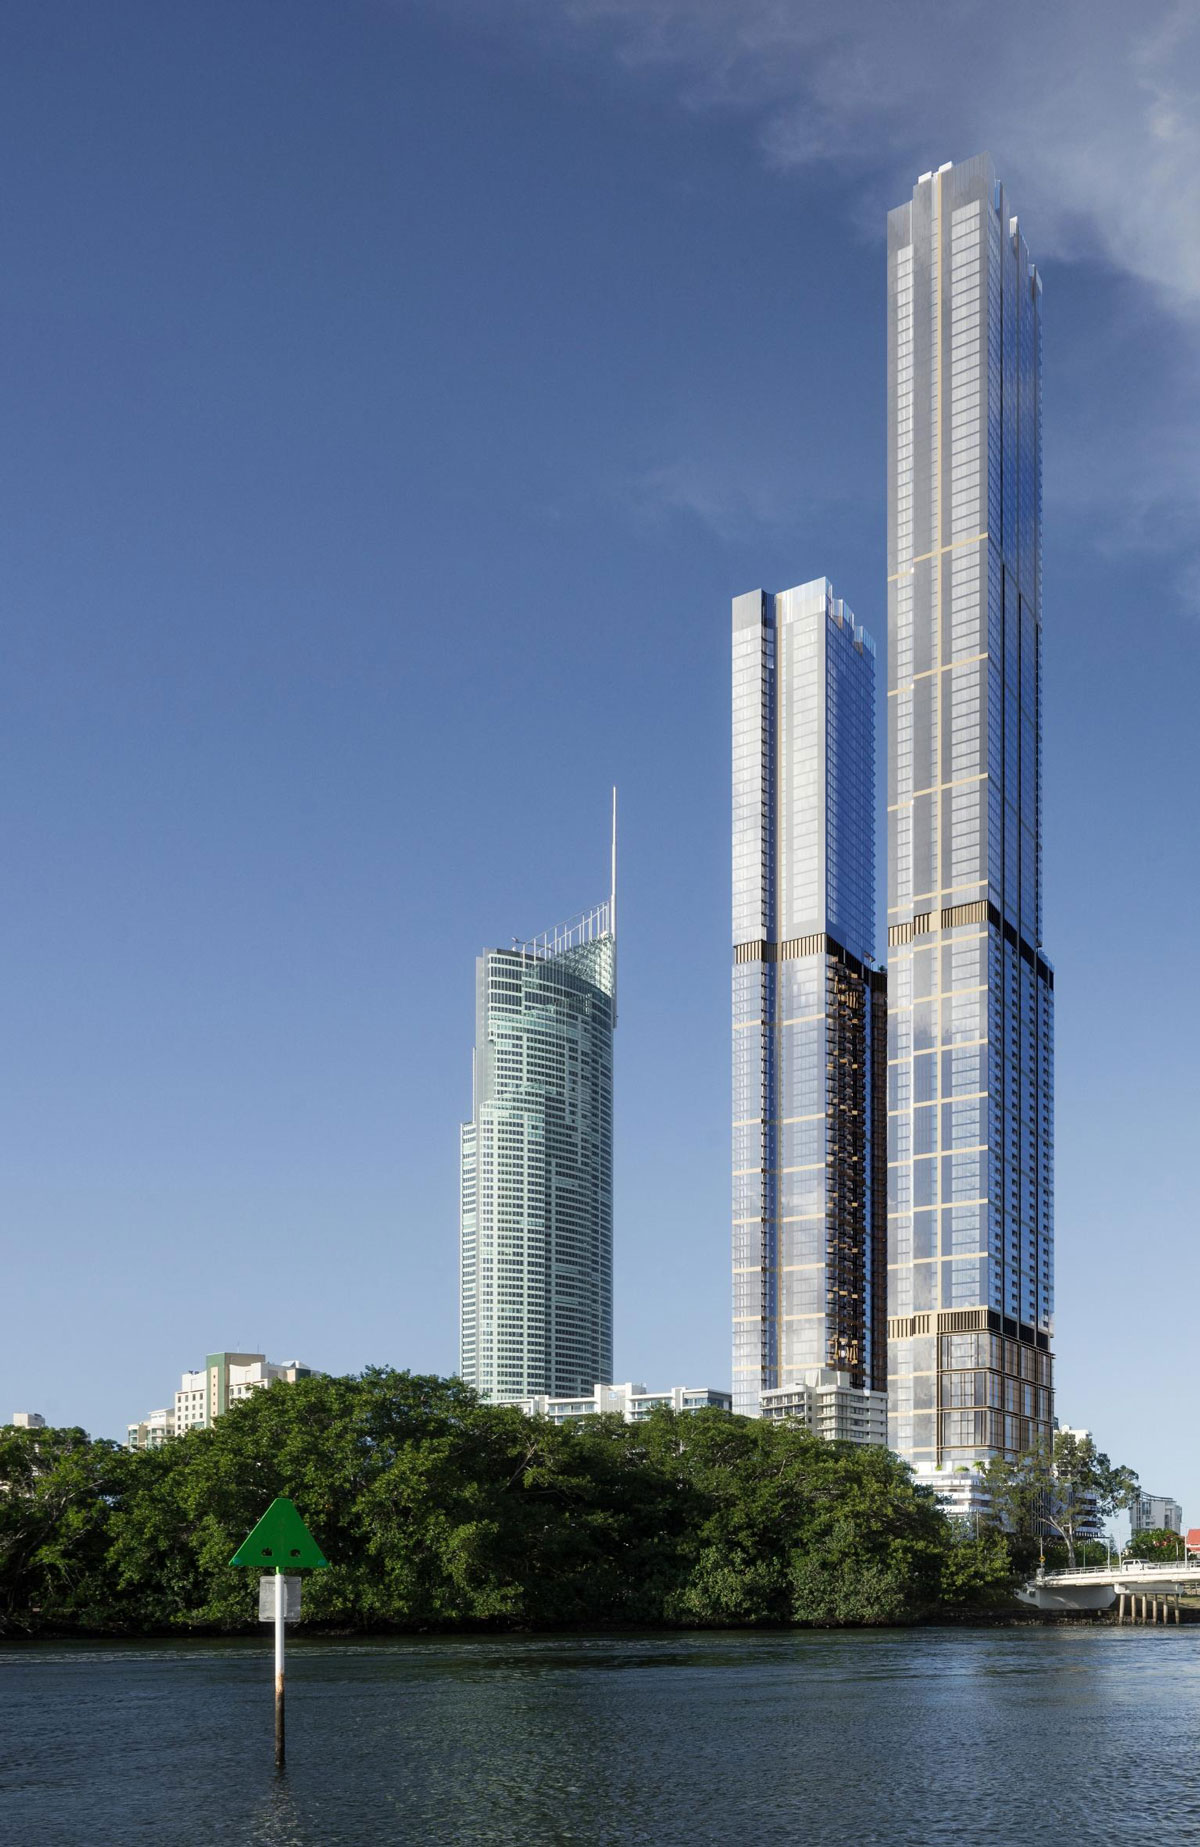 Artist's impression of proposed Orion Towers